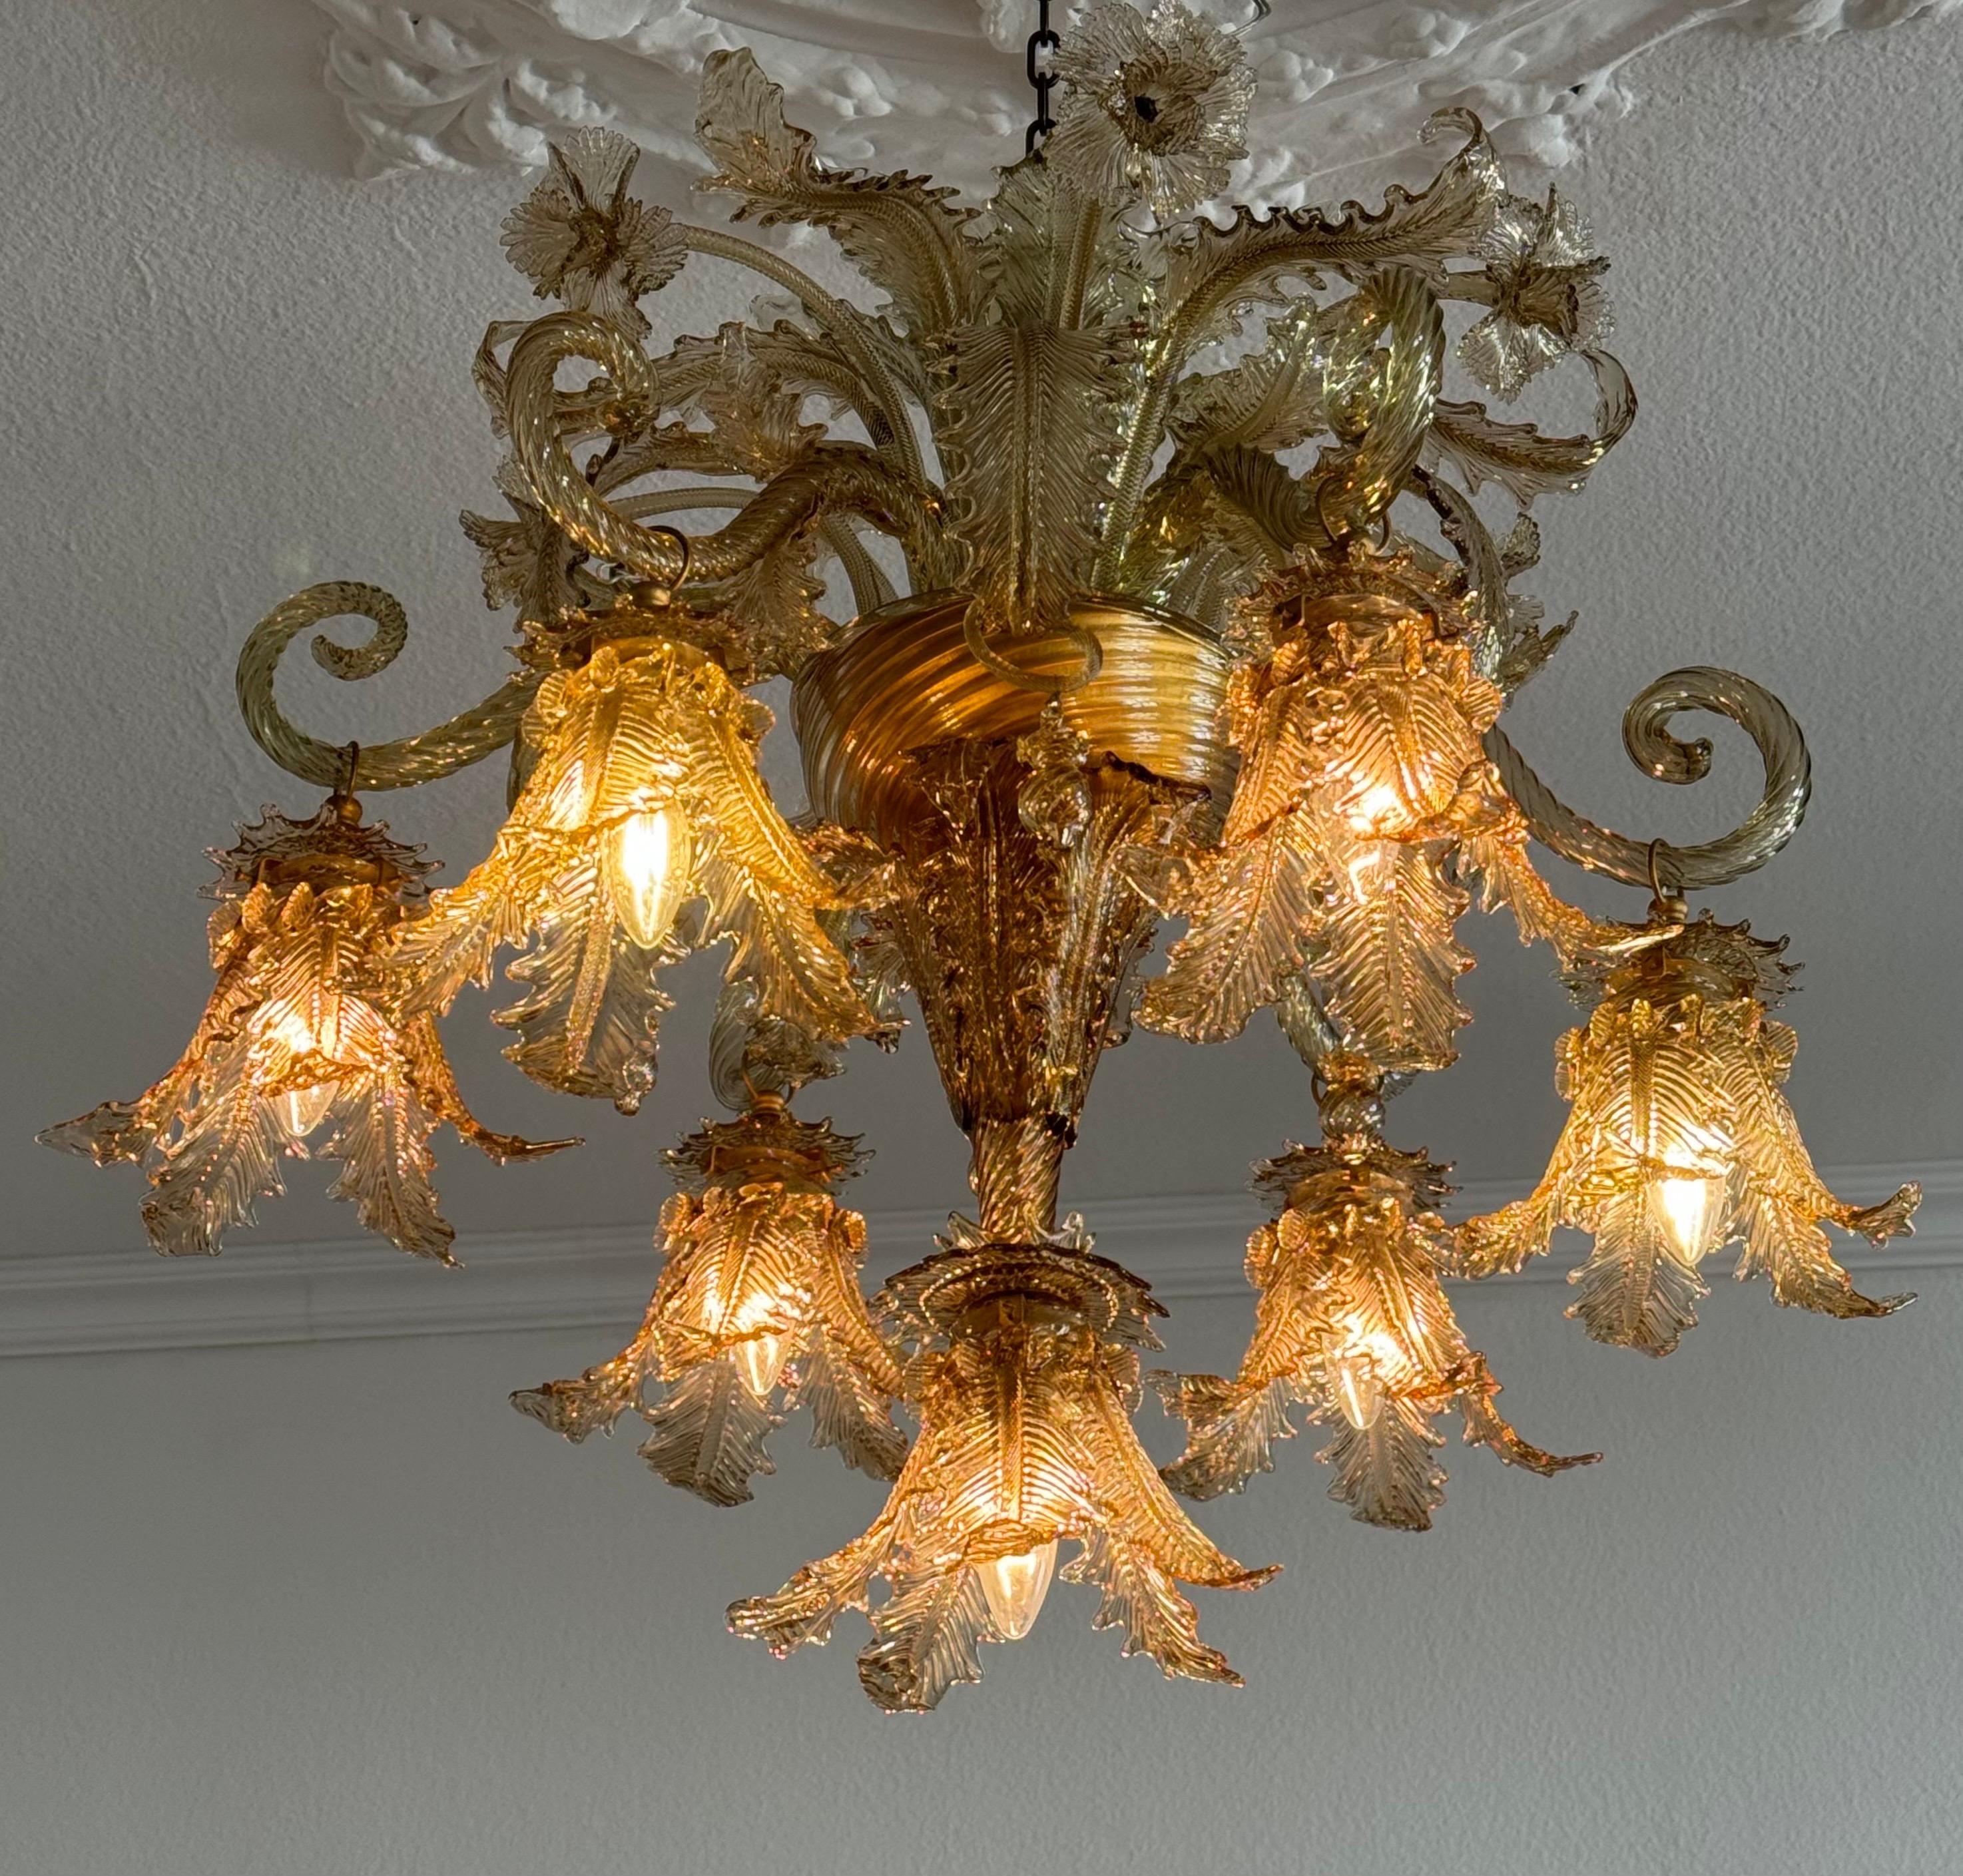 An exceptional and rare seven- lights Murano glass chandelier by Barovier e Toso, Italy, ca. 1940s.
This beautiful chandelier is richly decorated with flowers and leaves in cognac color.
Socket: 7 x e27 for standard screw bulbs.
New wiring for US